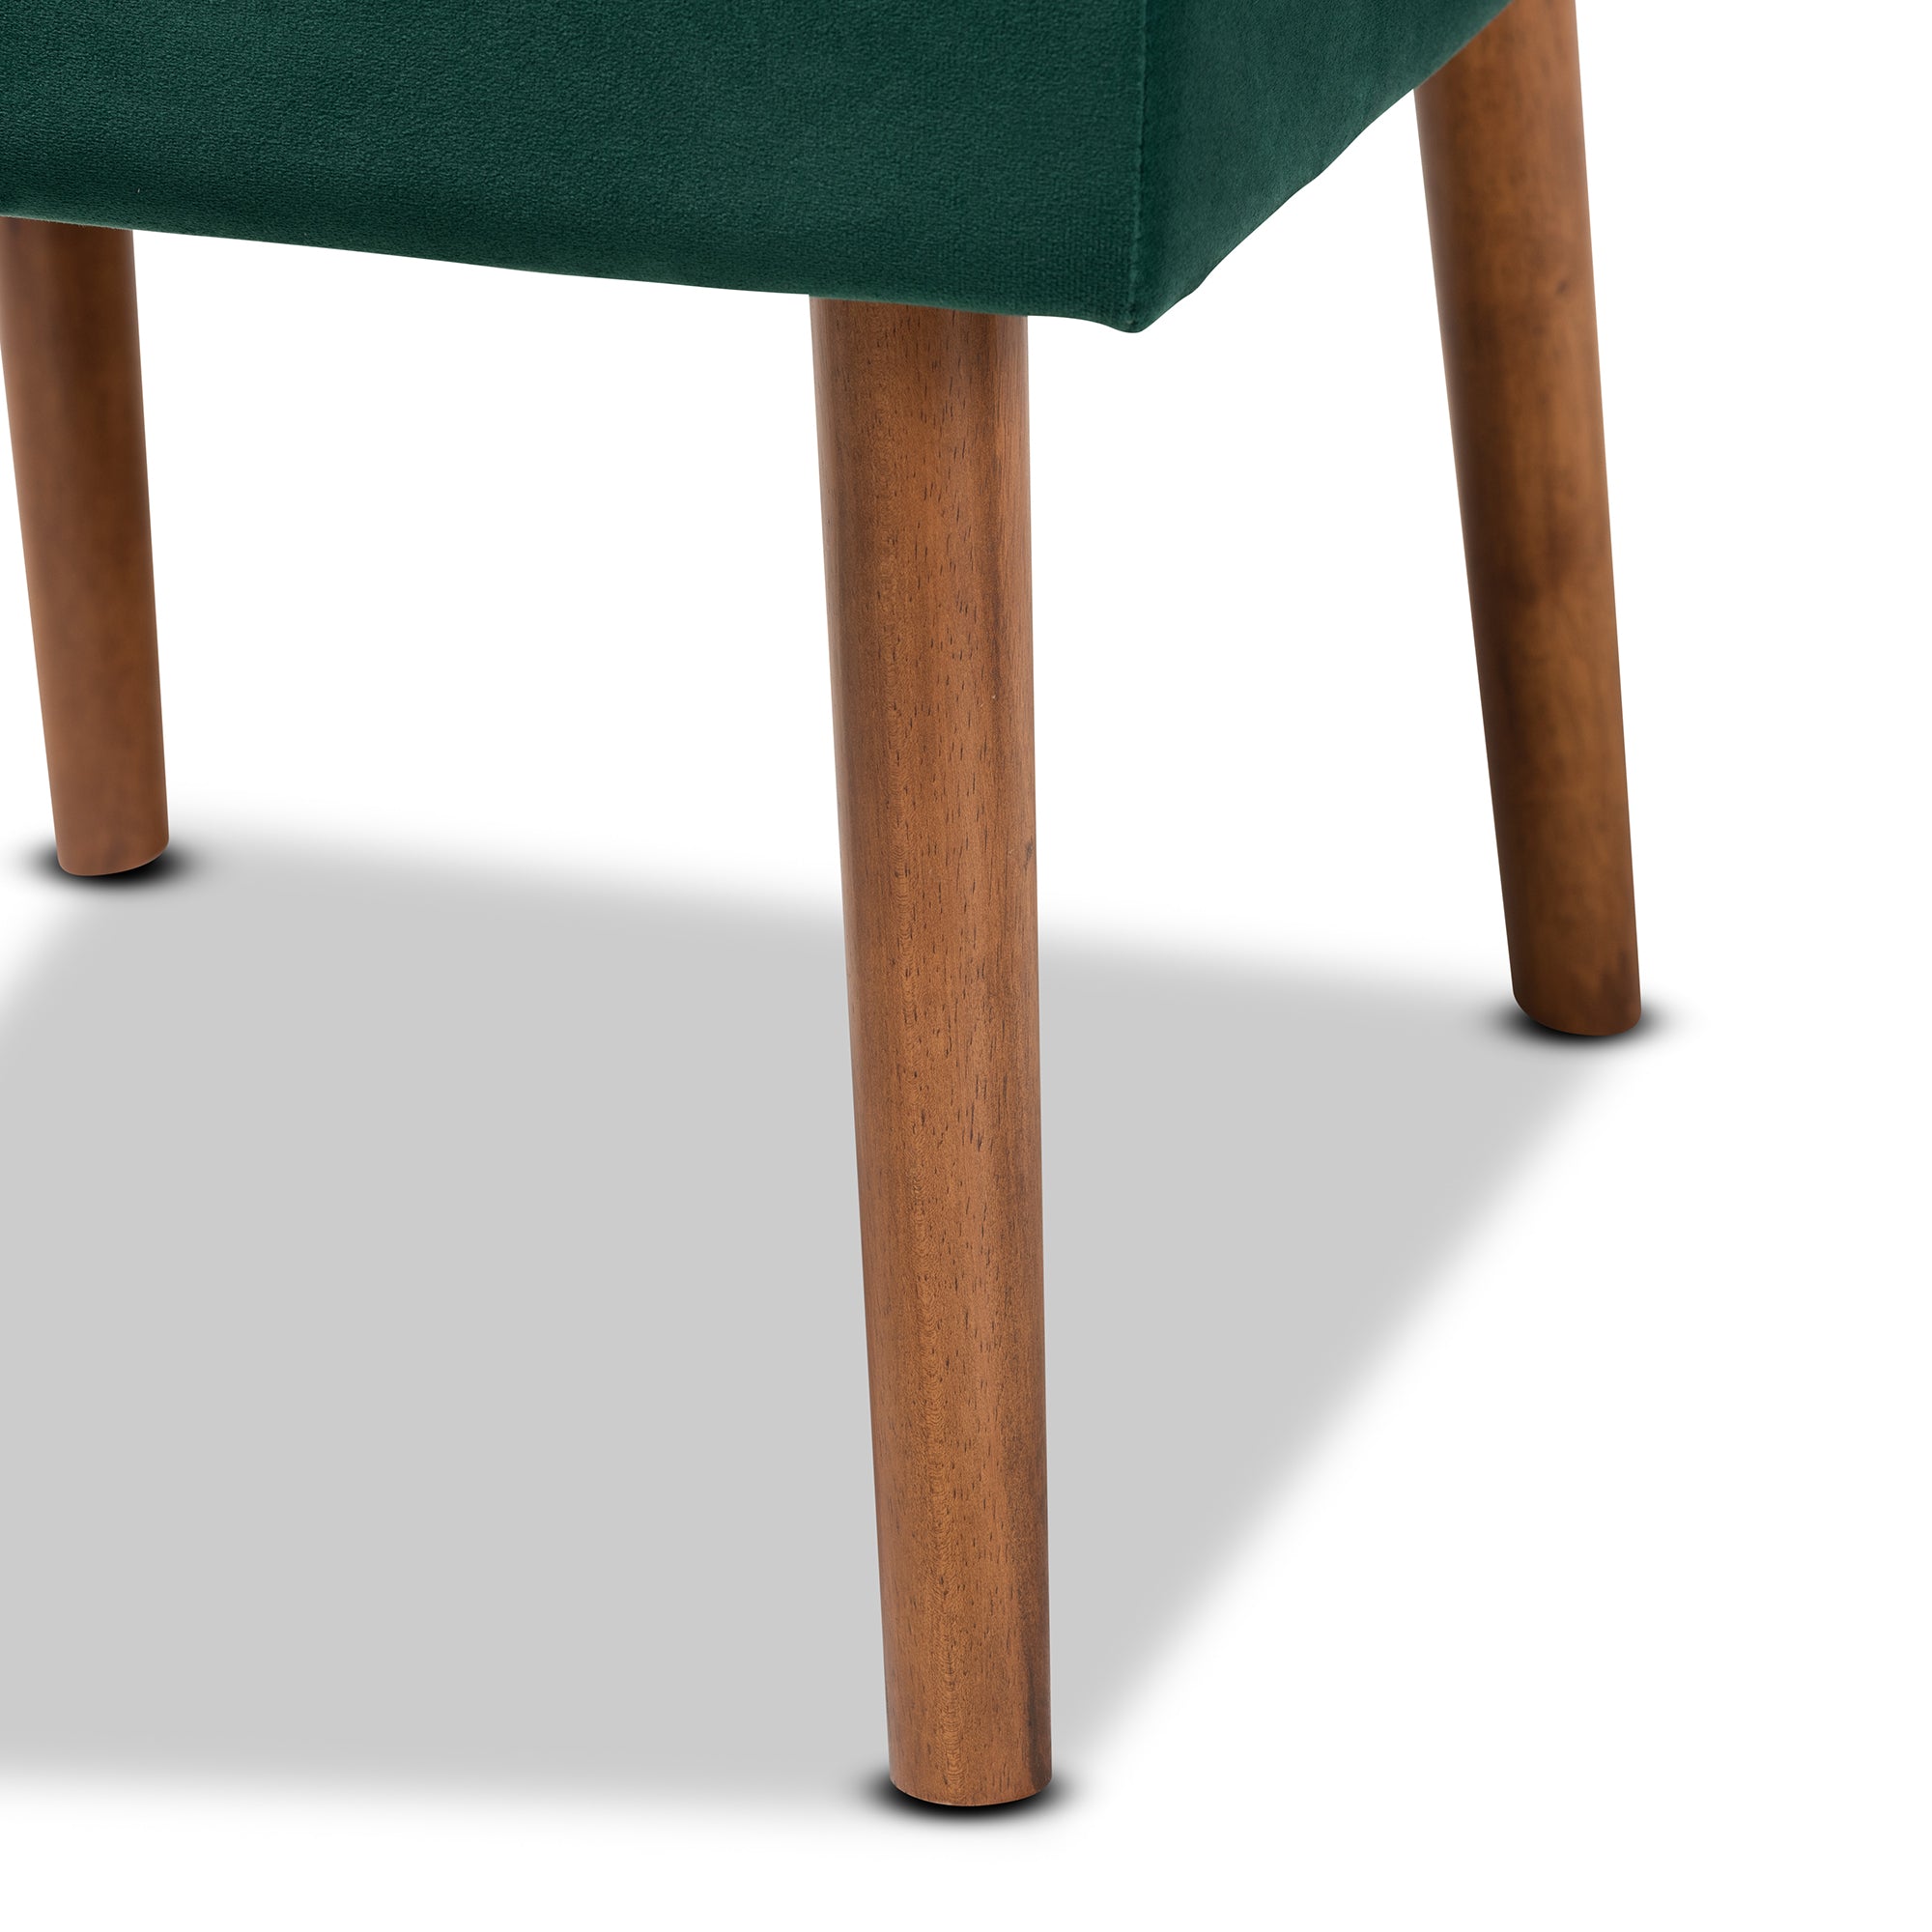 Alvis Mid-Century Dining Chair-Dining Chair-Baxton Studio - WI-Wall2Wall Furnishings